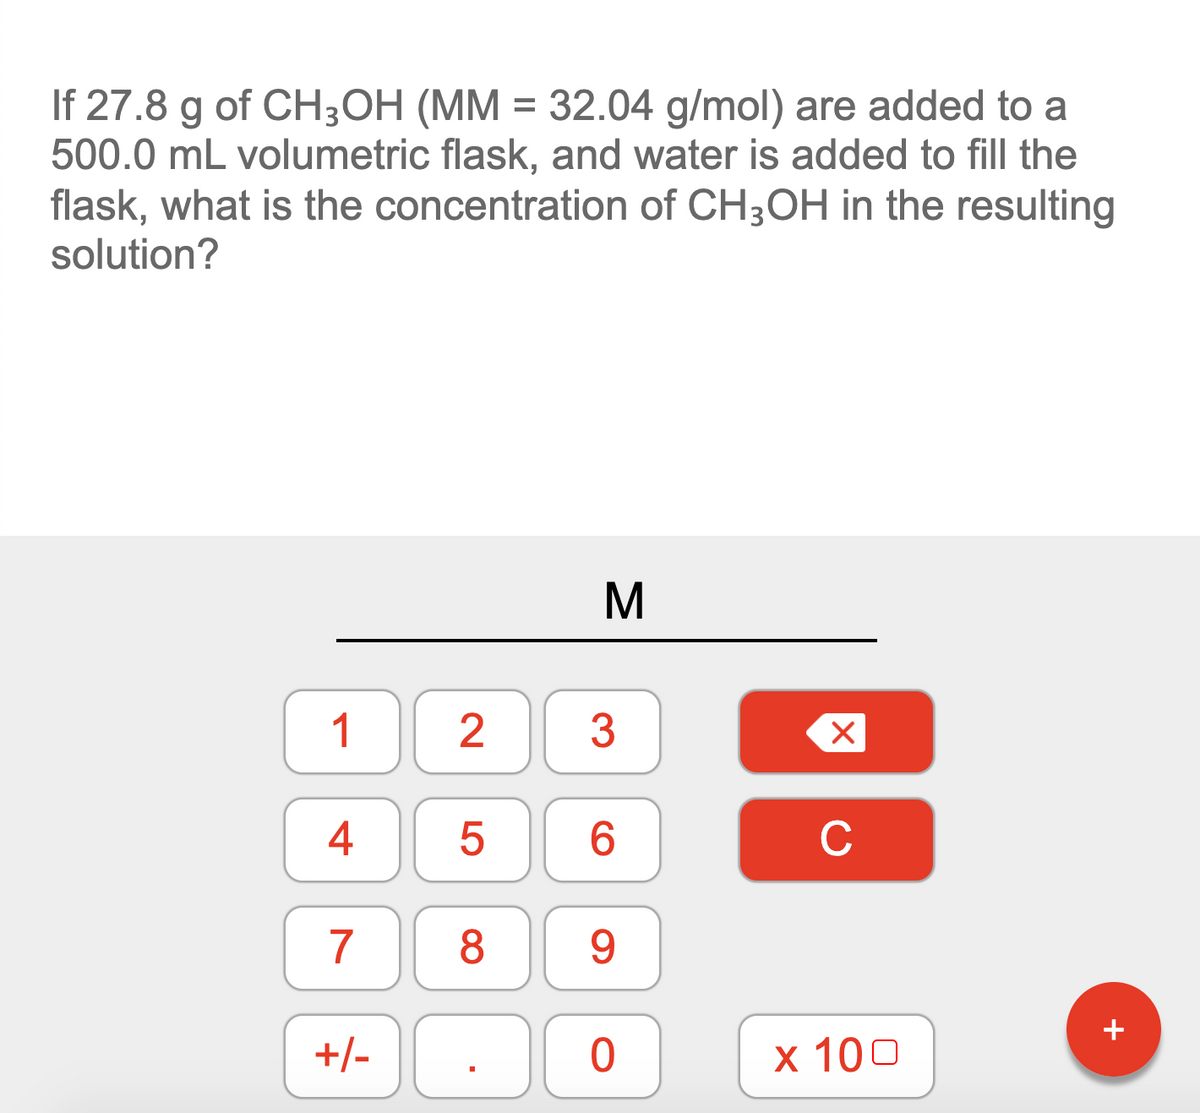 If 27.8 g of CH3OH (MM = 32.04 g/mol) are added to a
500.0 mL volumetric flask, and water is added to fill the
flask, what is the concentration of CH3OH in the resulting
solution?
M
1
3
6.
C
7
8.
9.
+
+/-
х 100
2.
LO
4.
